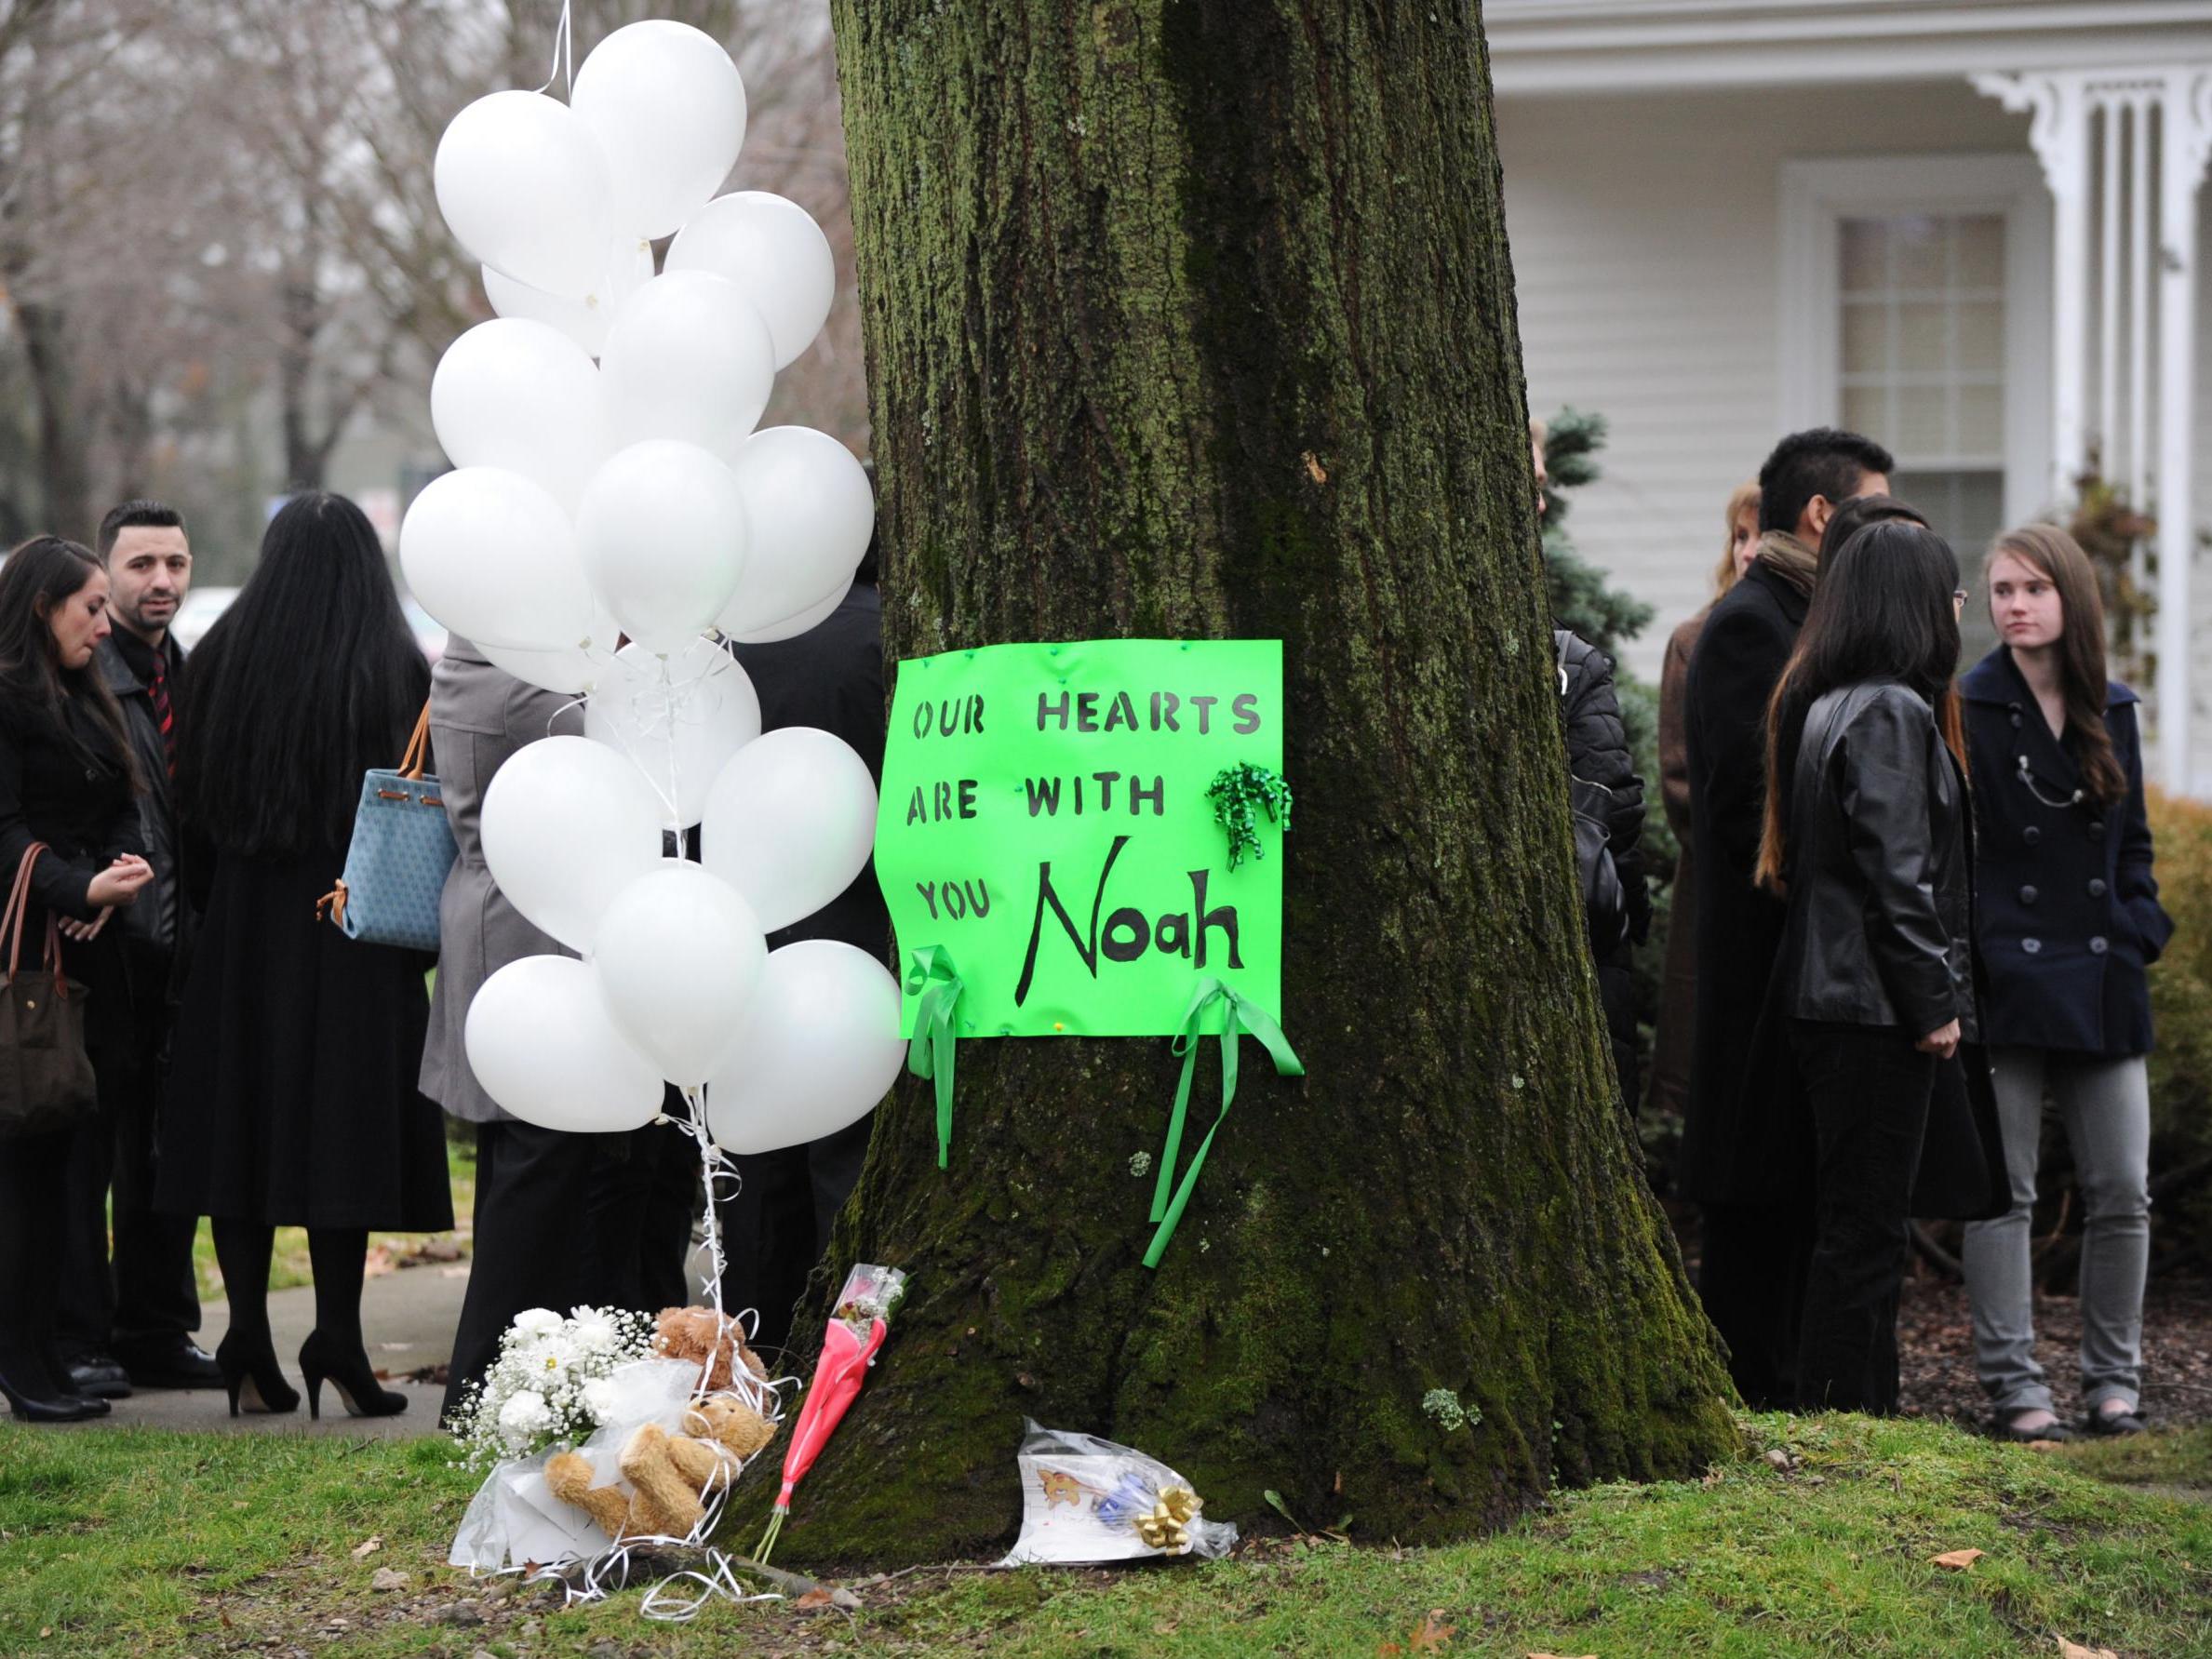 Father of Noah Pozner has won a lawsuit against the writers of a book claiming the Sandy Hook massacre was a hoax